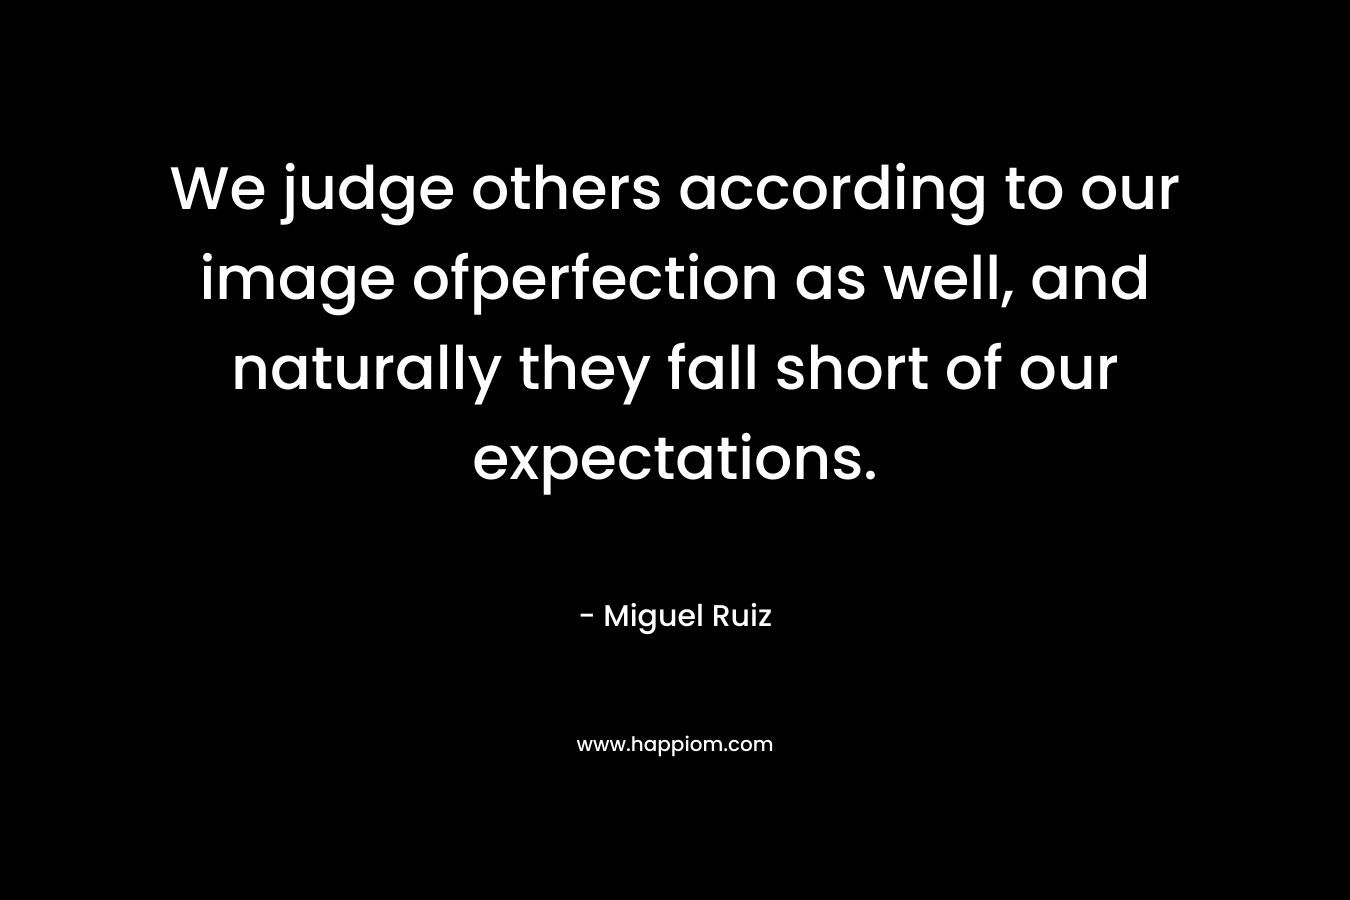 We judge others according to our image ofperfection as well, and naturally they fall short of our expectations. – Miguel Ruiz